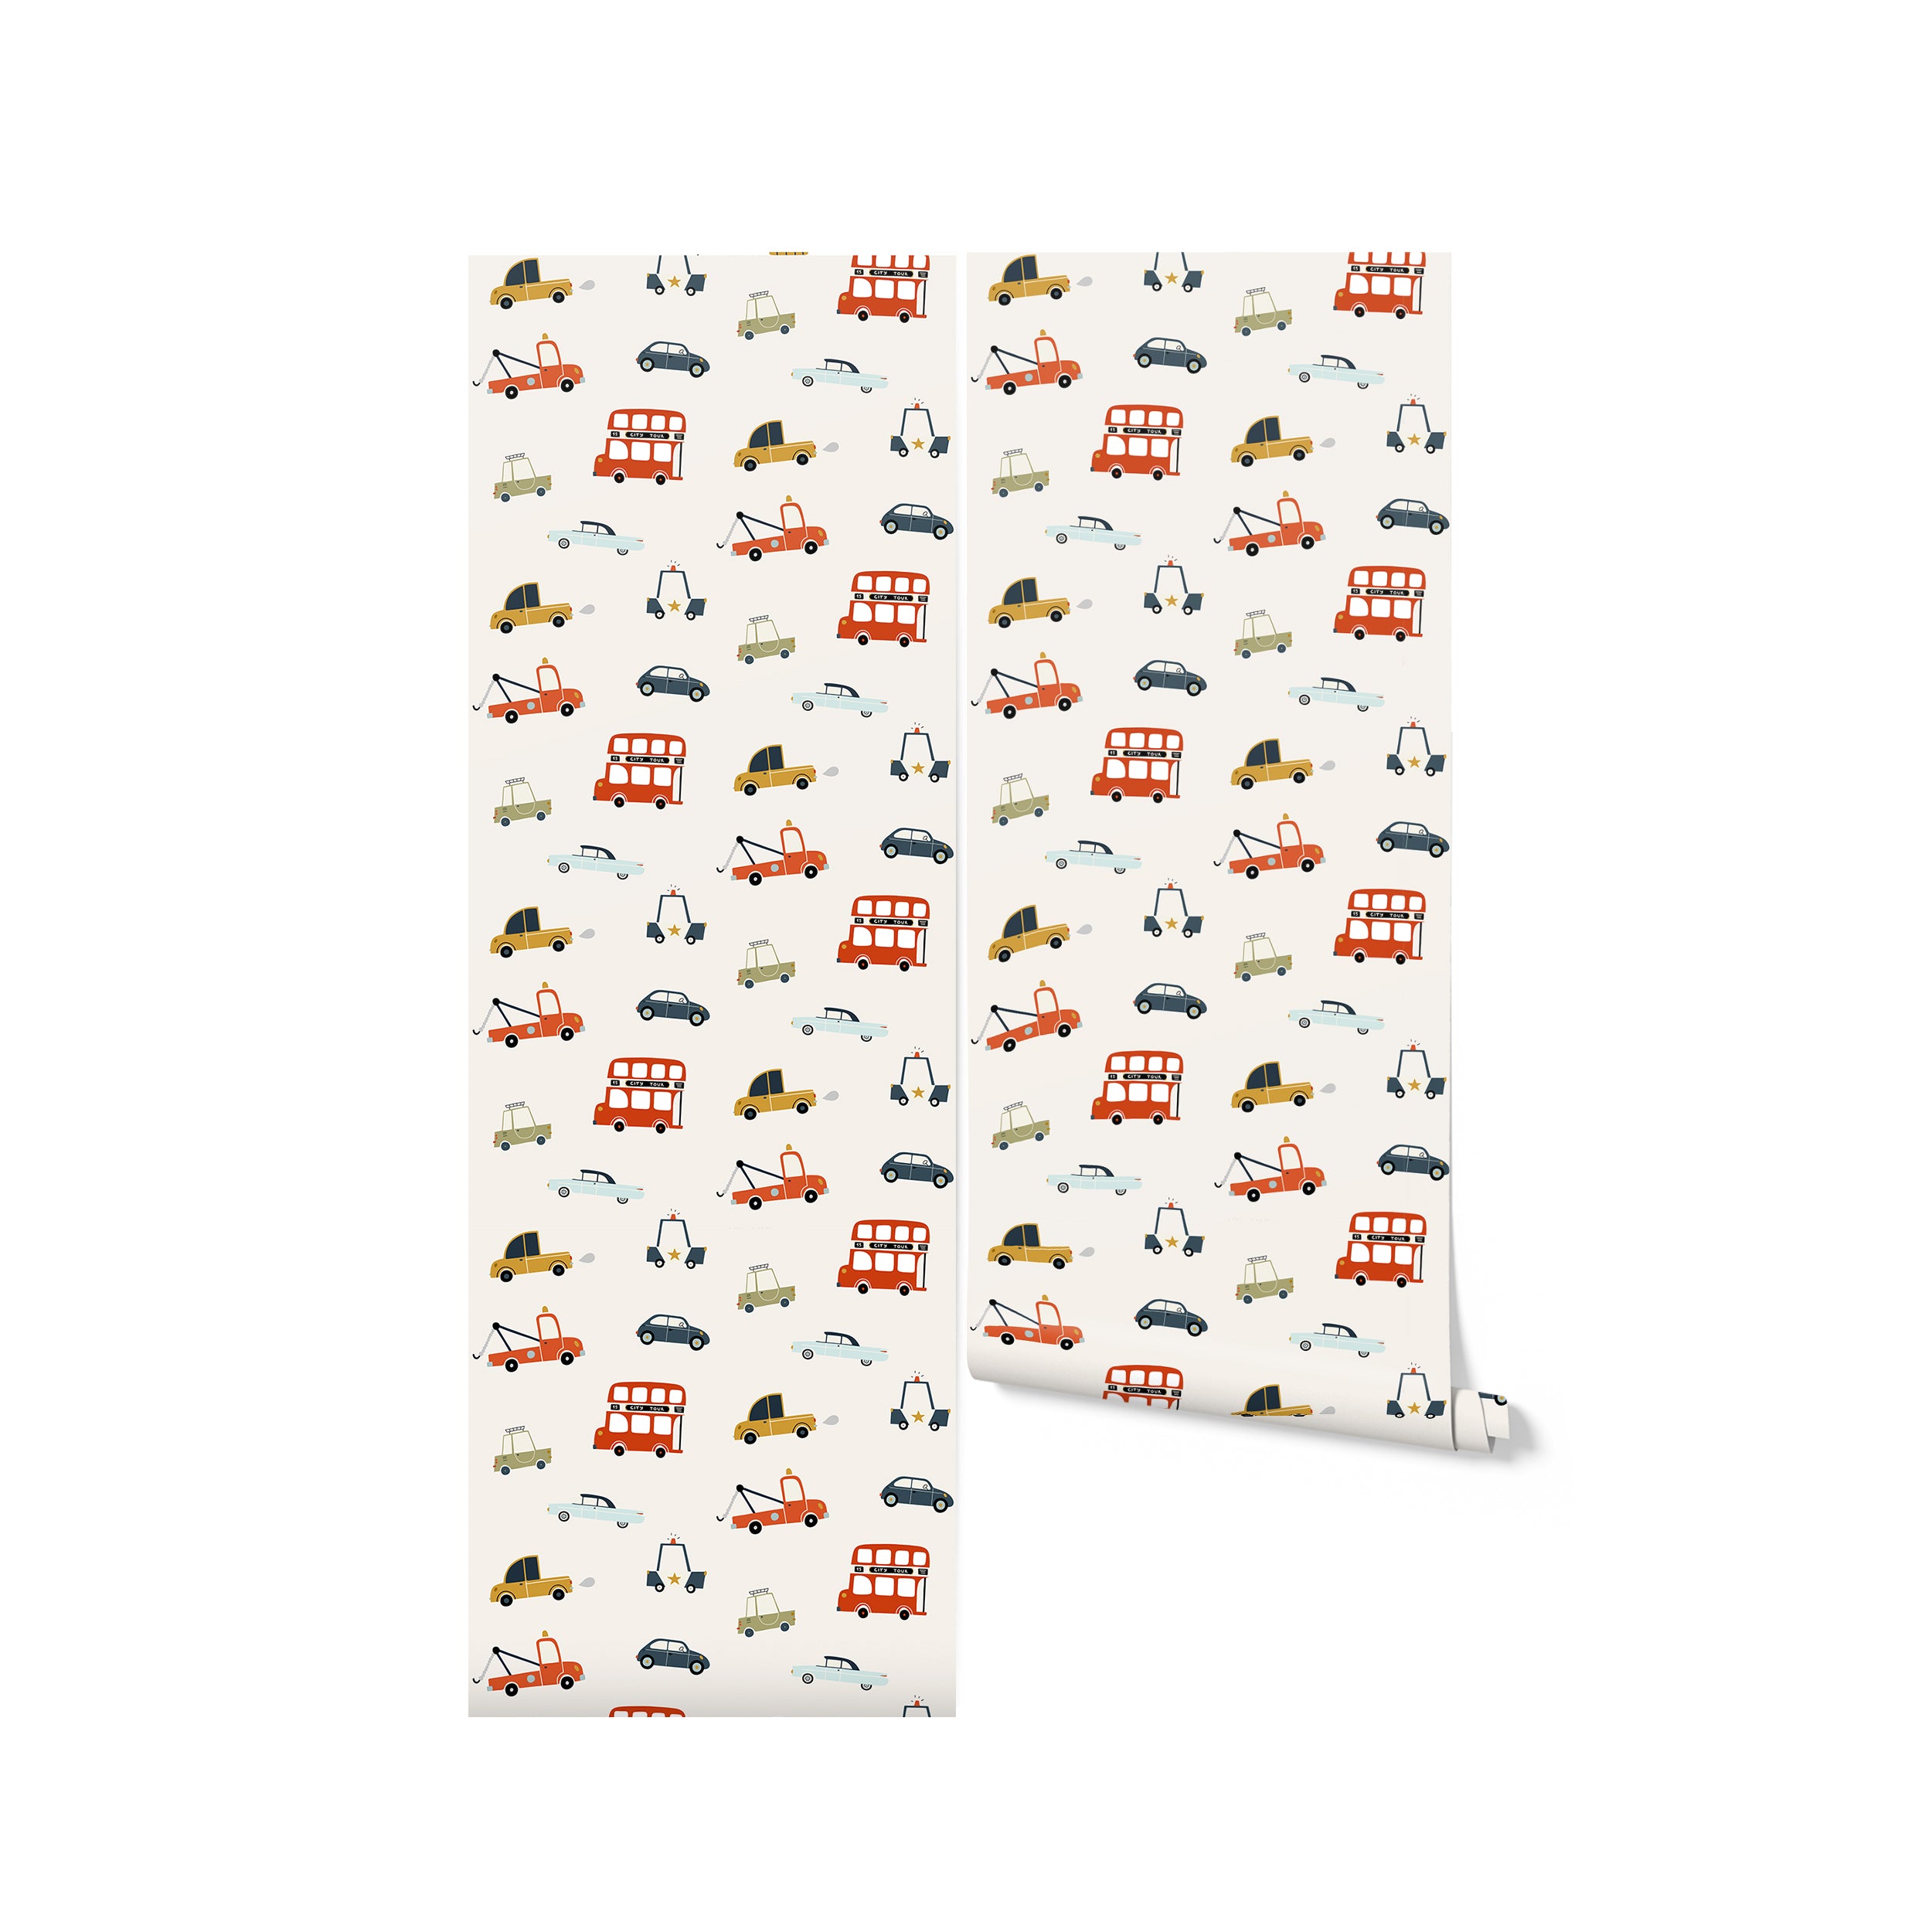 Rolls of Cute Trucks and Cars Wallpaper displaying a charming assortment of cartoon-style vehicles on a light ecru background. This wallpaper is perfect for adding a touch of fun and nostalgia to any child's bedroom or play area, with its cute and colorful vehicle designs.